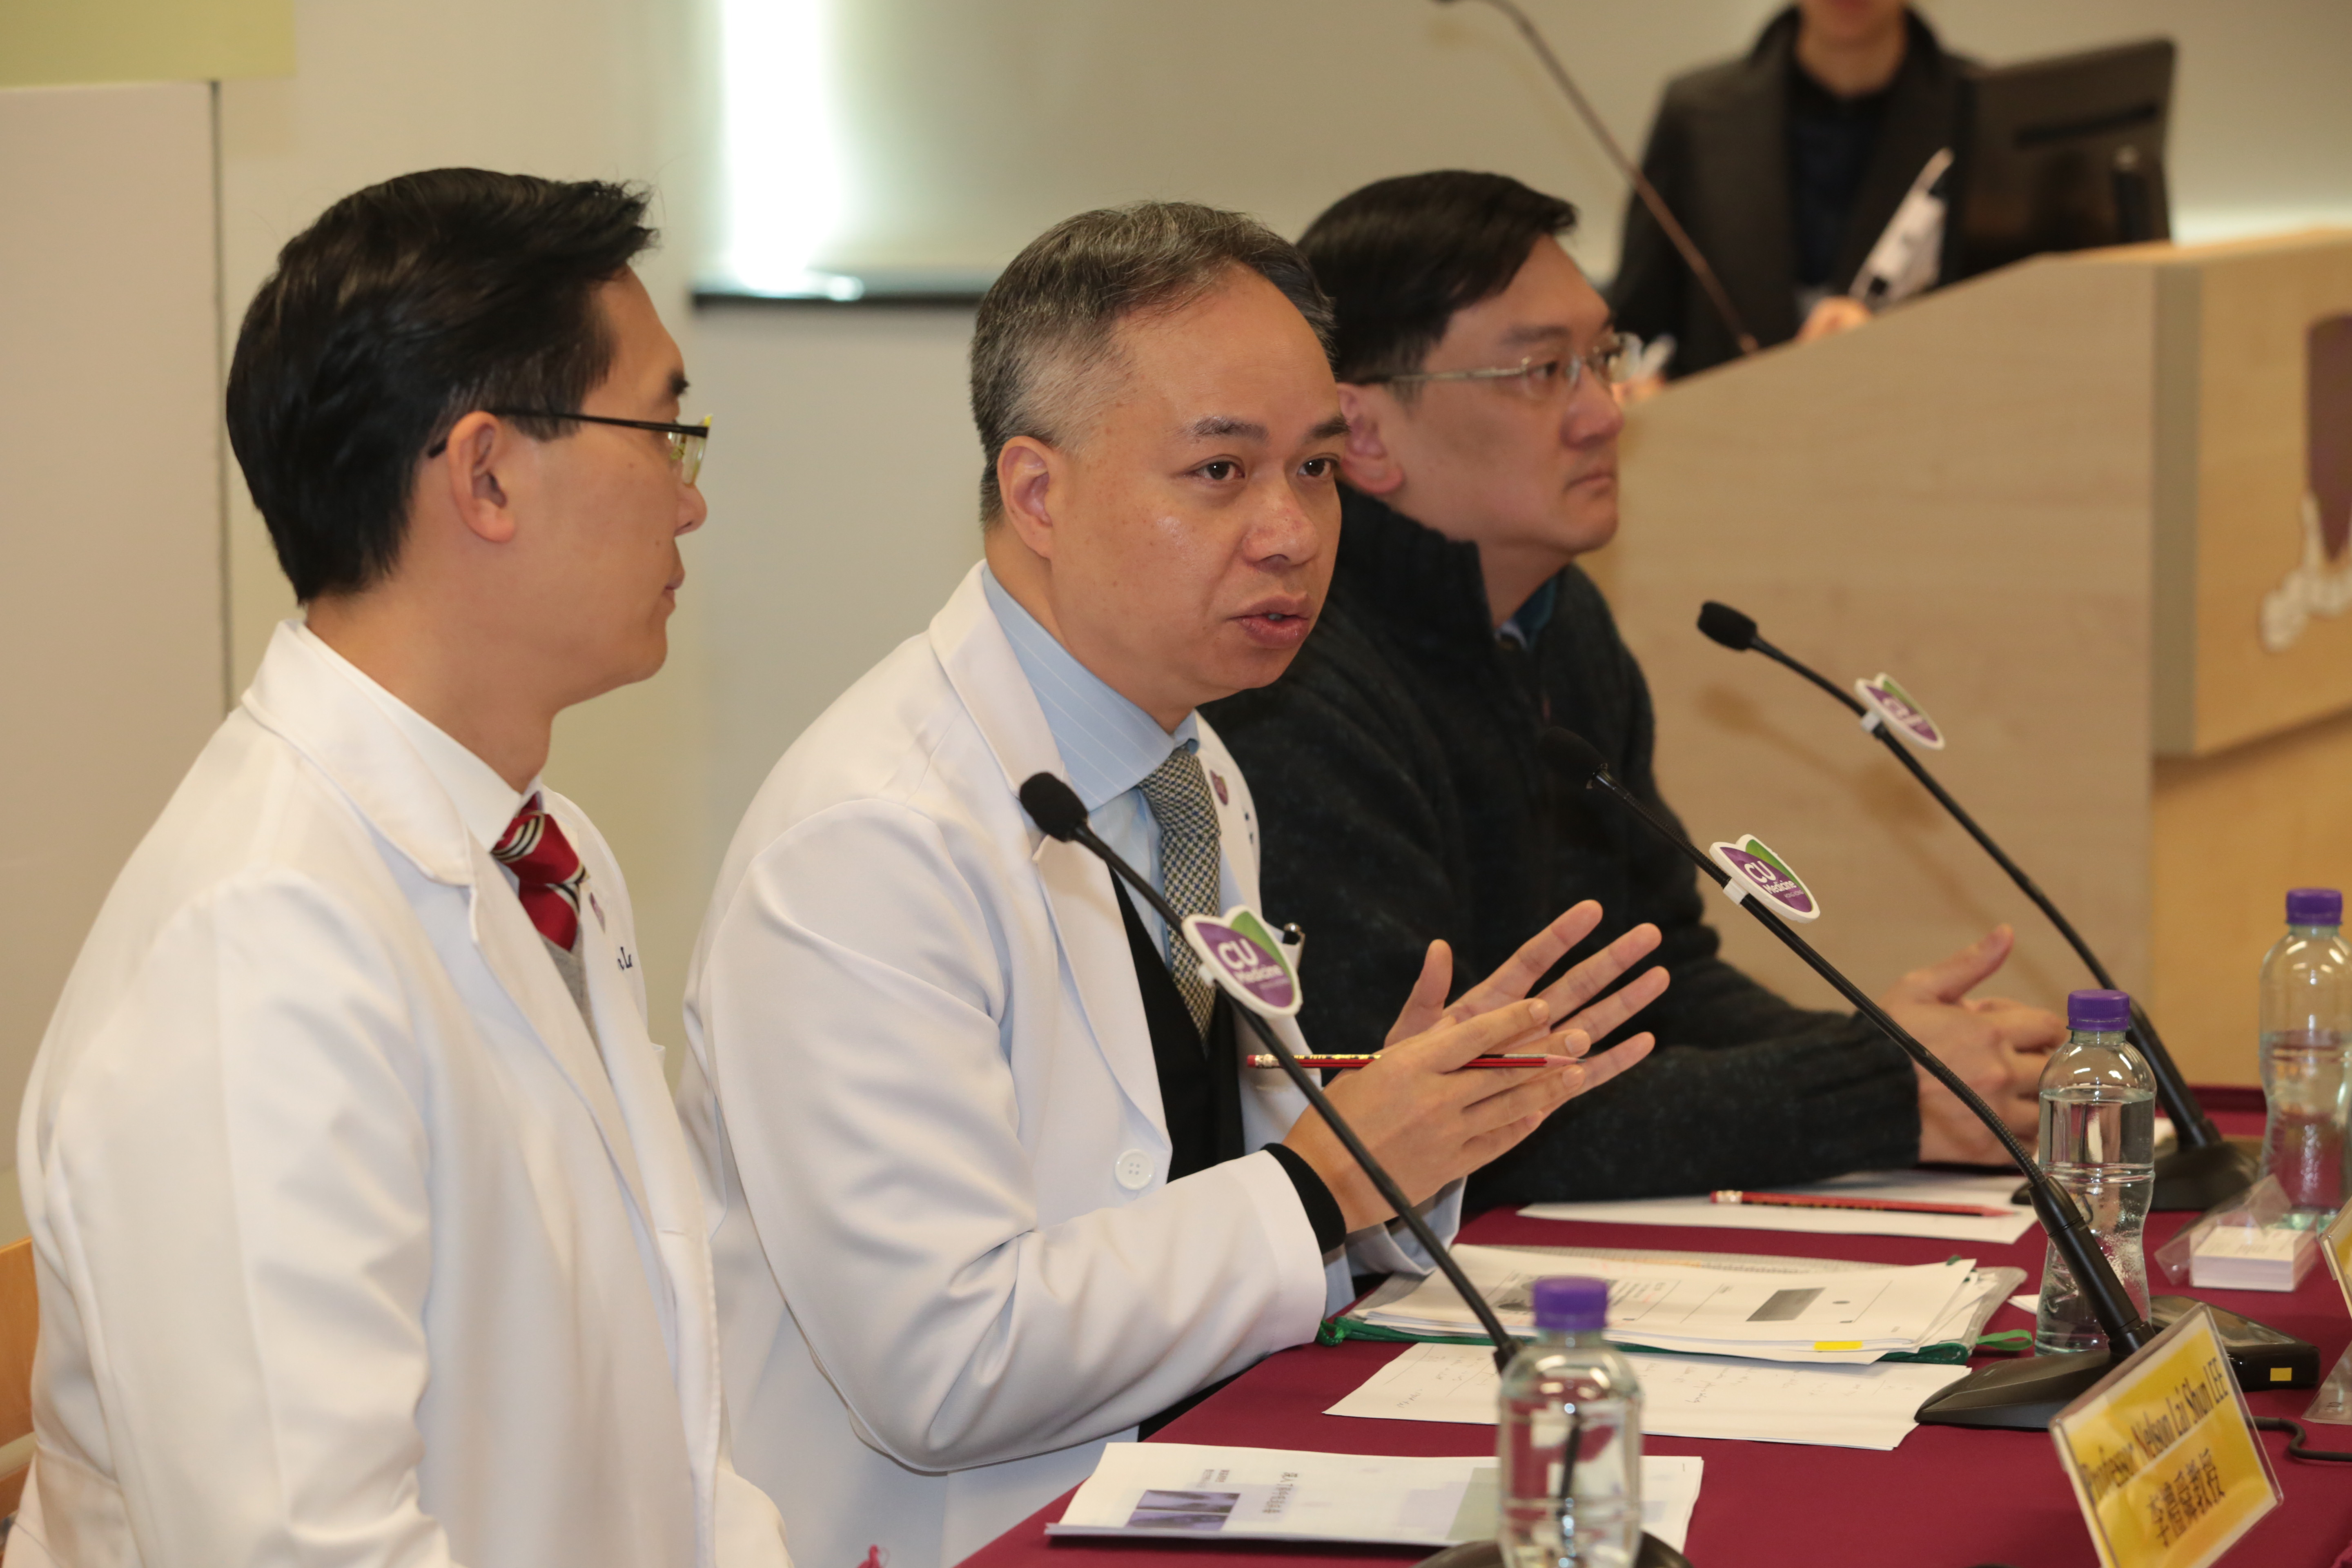 Prof. Paul CHAN, Chairman, Department of Microbiology (middle) suggests public hospitals to implement rapid diagnostic test targeting RSV and influenza A for patients with respiratory infection symptoms.